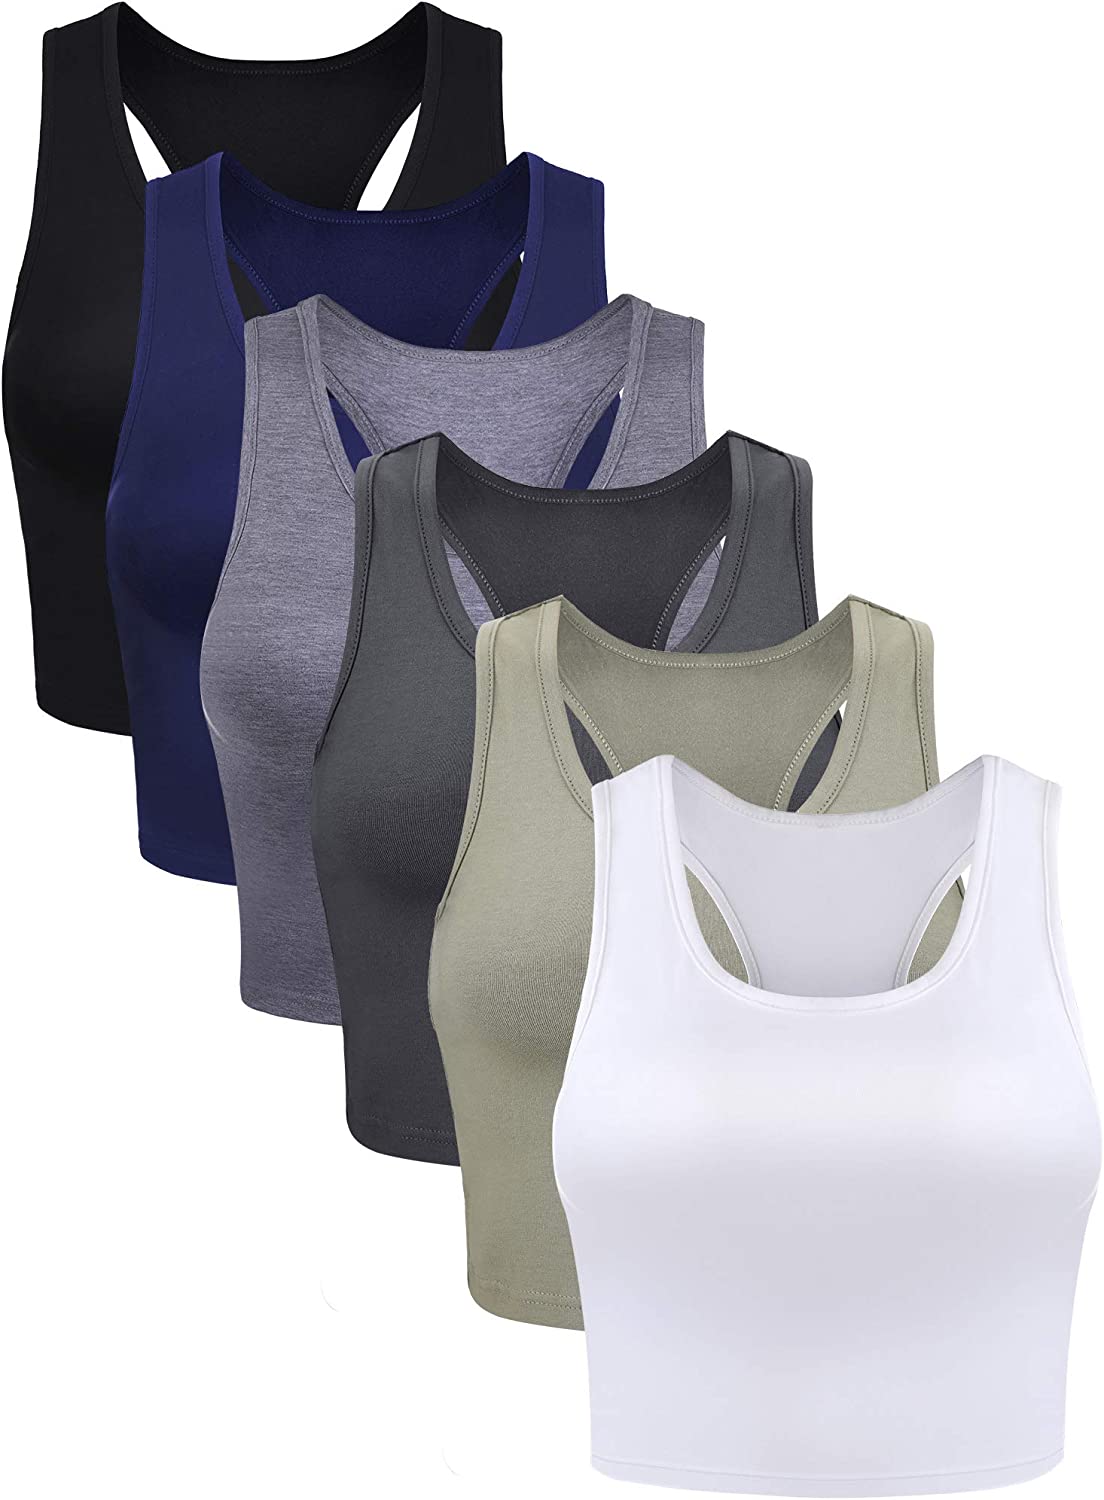 6 Pieces Basic Sleeveless Racerback Sports Crop Tank Tops for Women Girls Daily Wearing